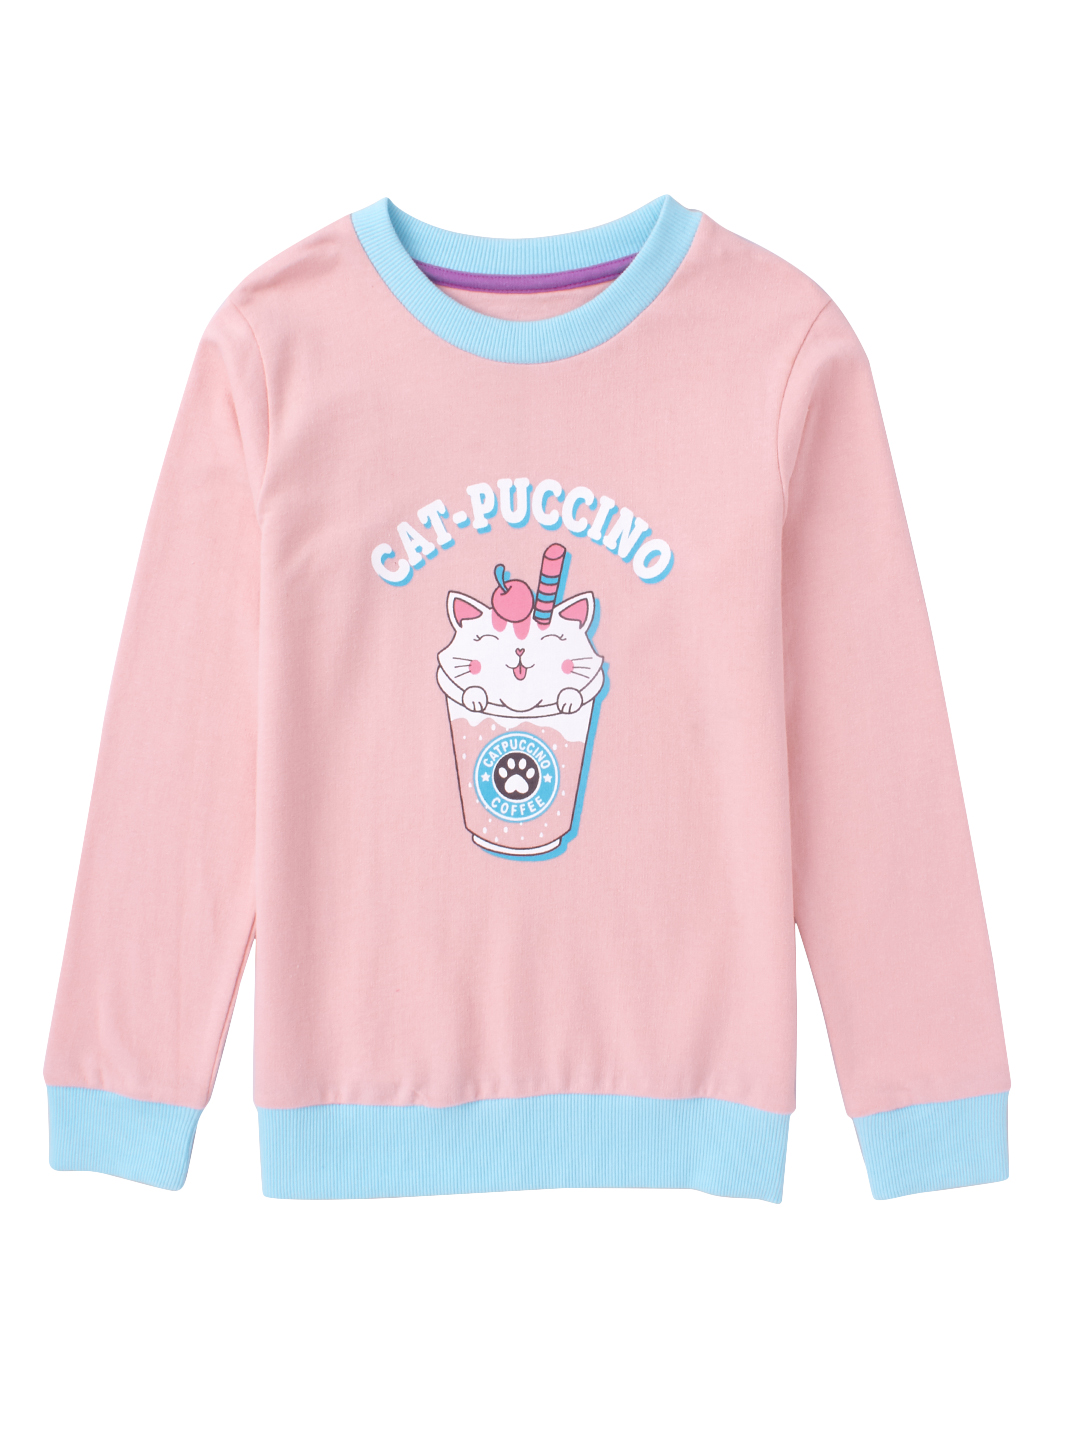 Shop Pink Fashion Sweatshirt for teenage Girls at Best Prices in India